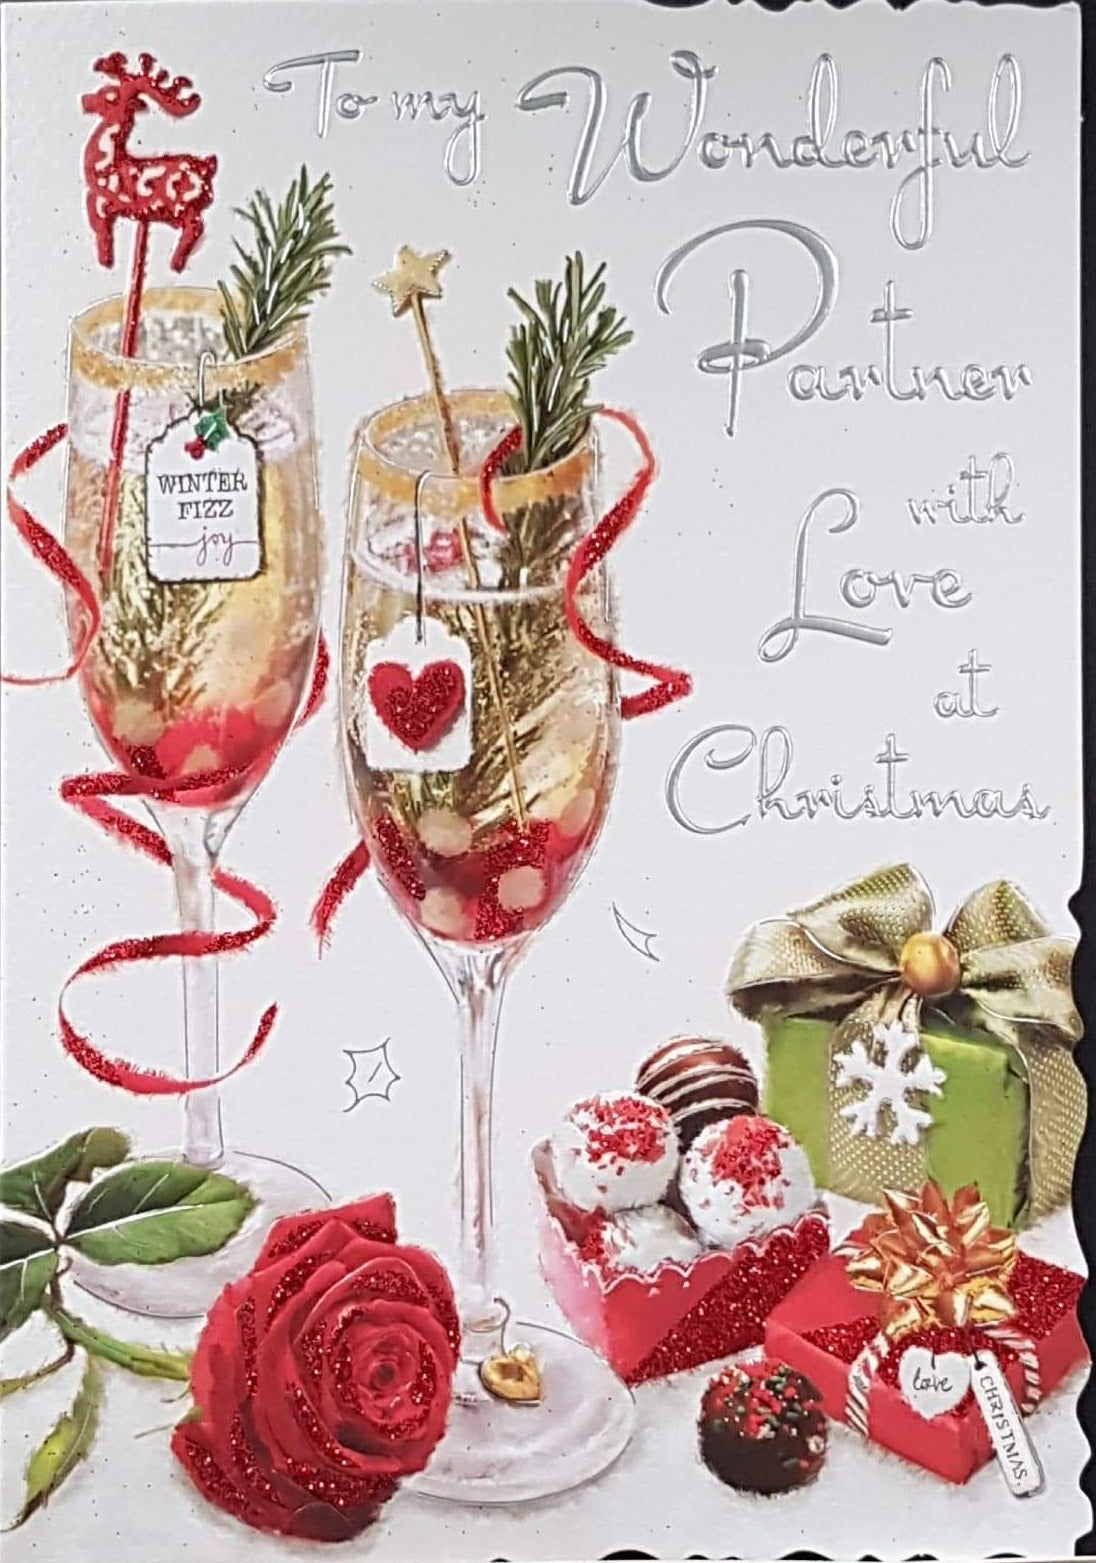 Partner Christmas Card - With Love at Christmas & Champagne Glasses & Gifts